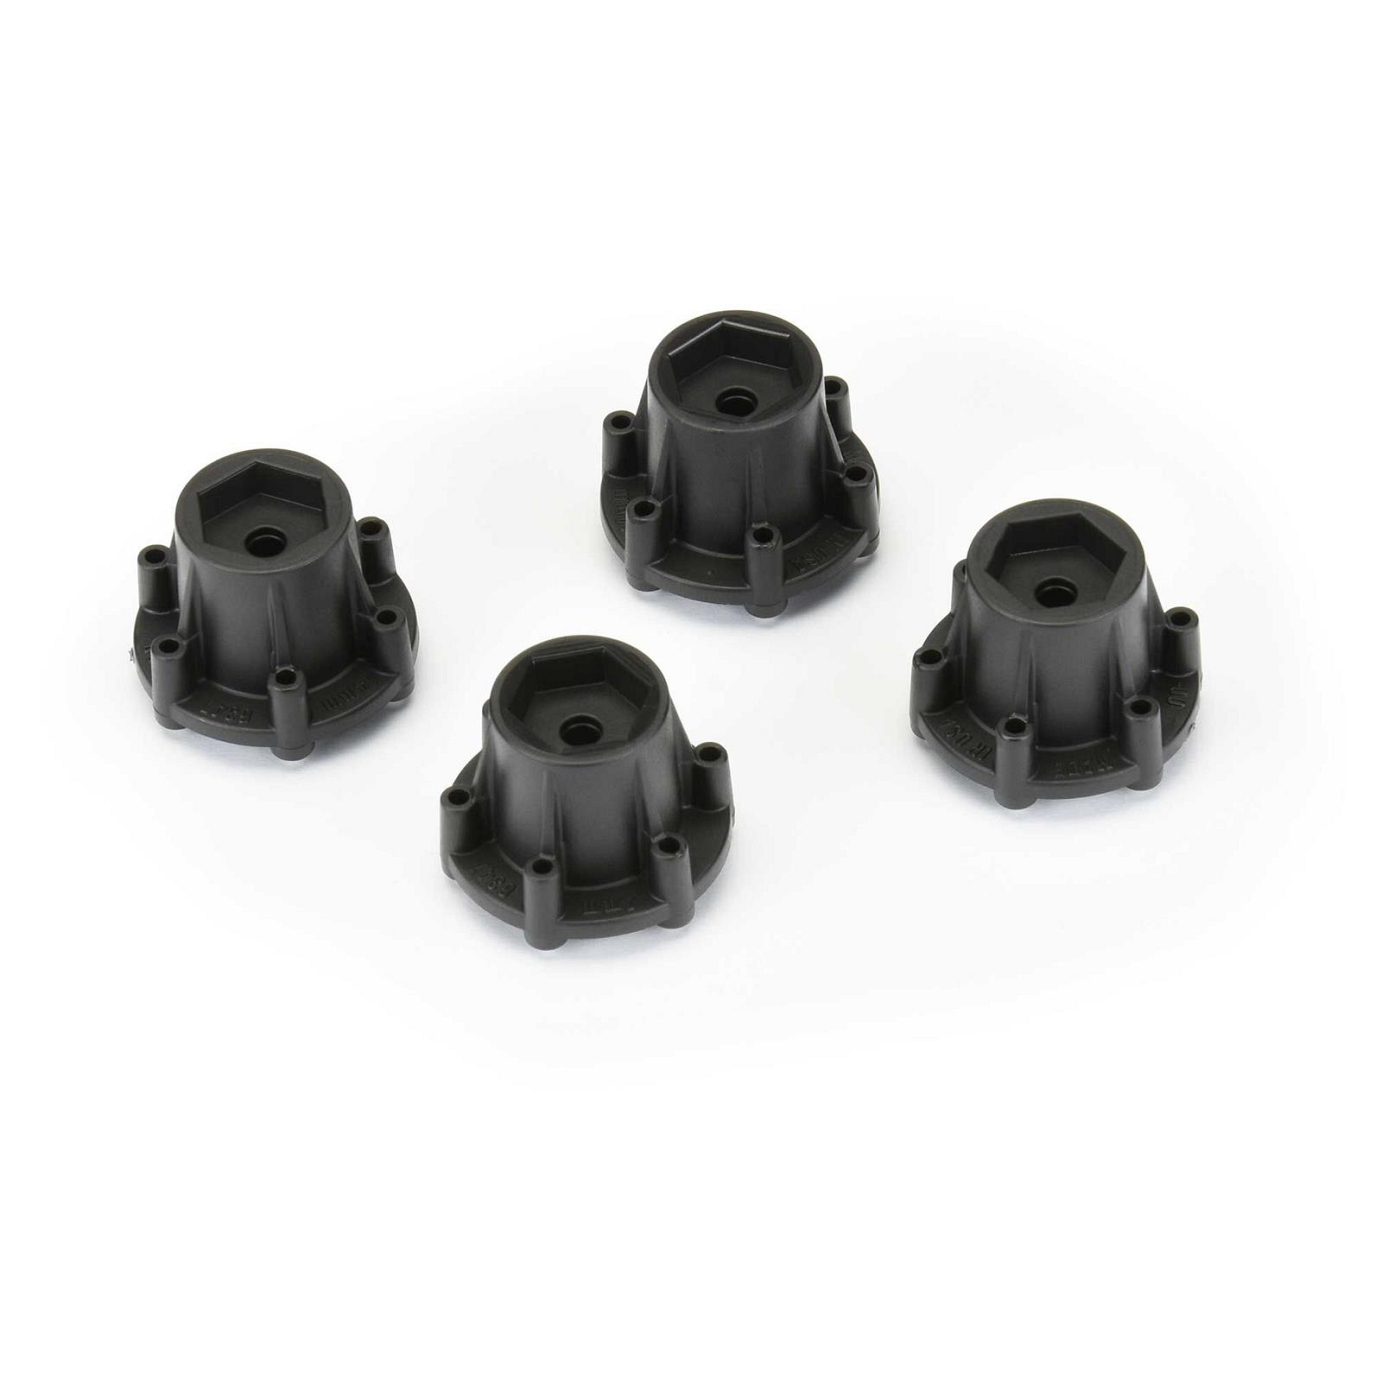 Proline 6x30 to 14mm Hex Adapters for 6x30 2.8inch Wheels, PR634